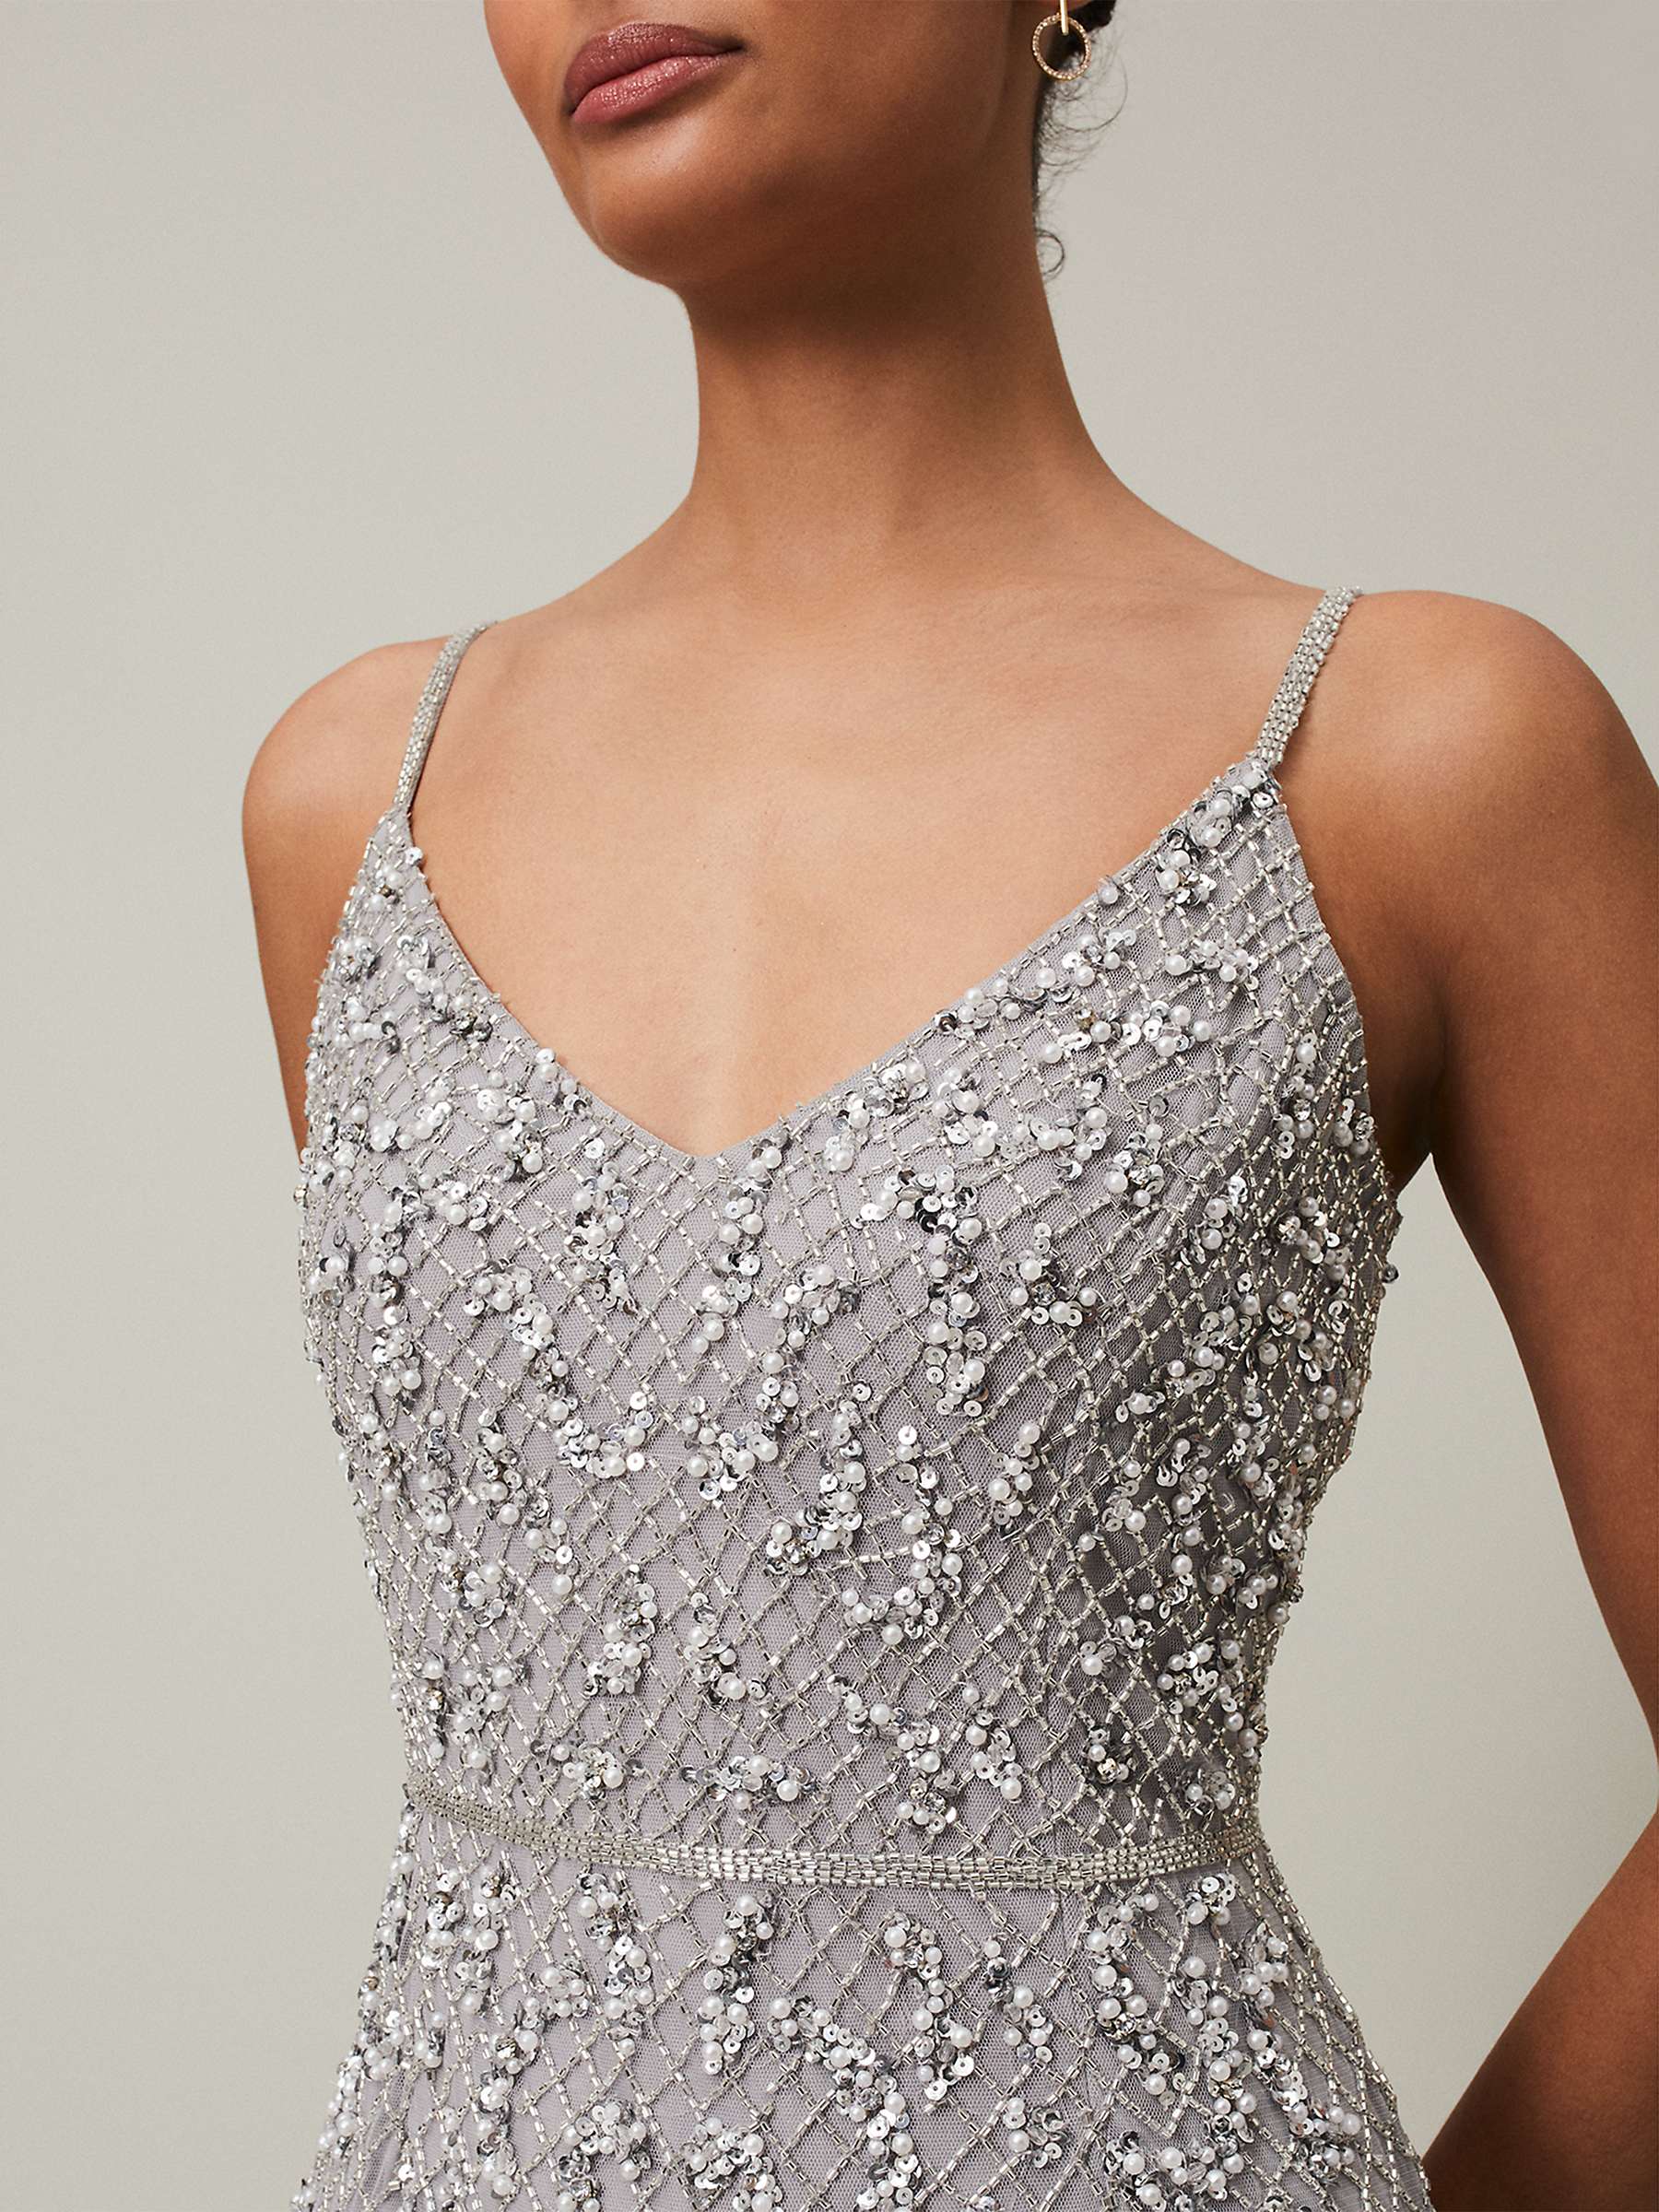 Buy Phase Eight Alexia Sequin Maxi Dress, Silver Online at johnlewis.com